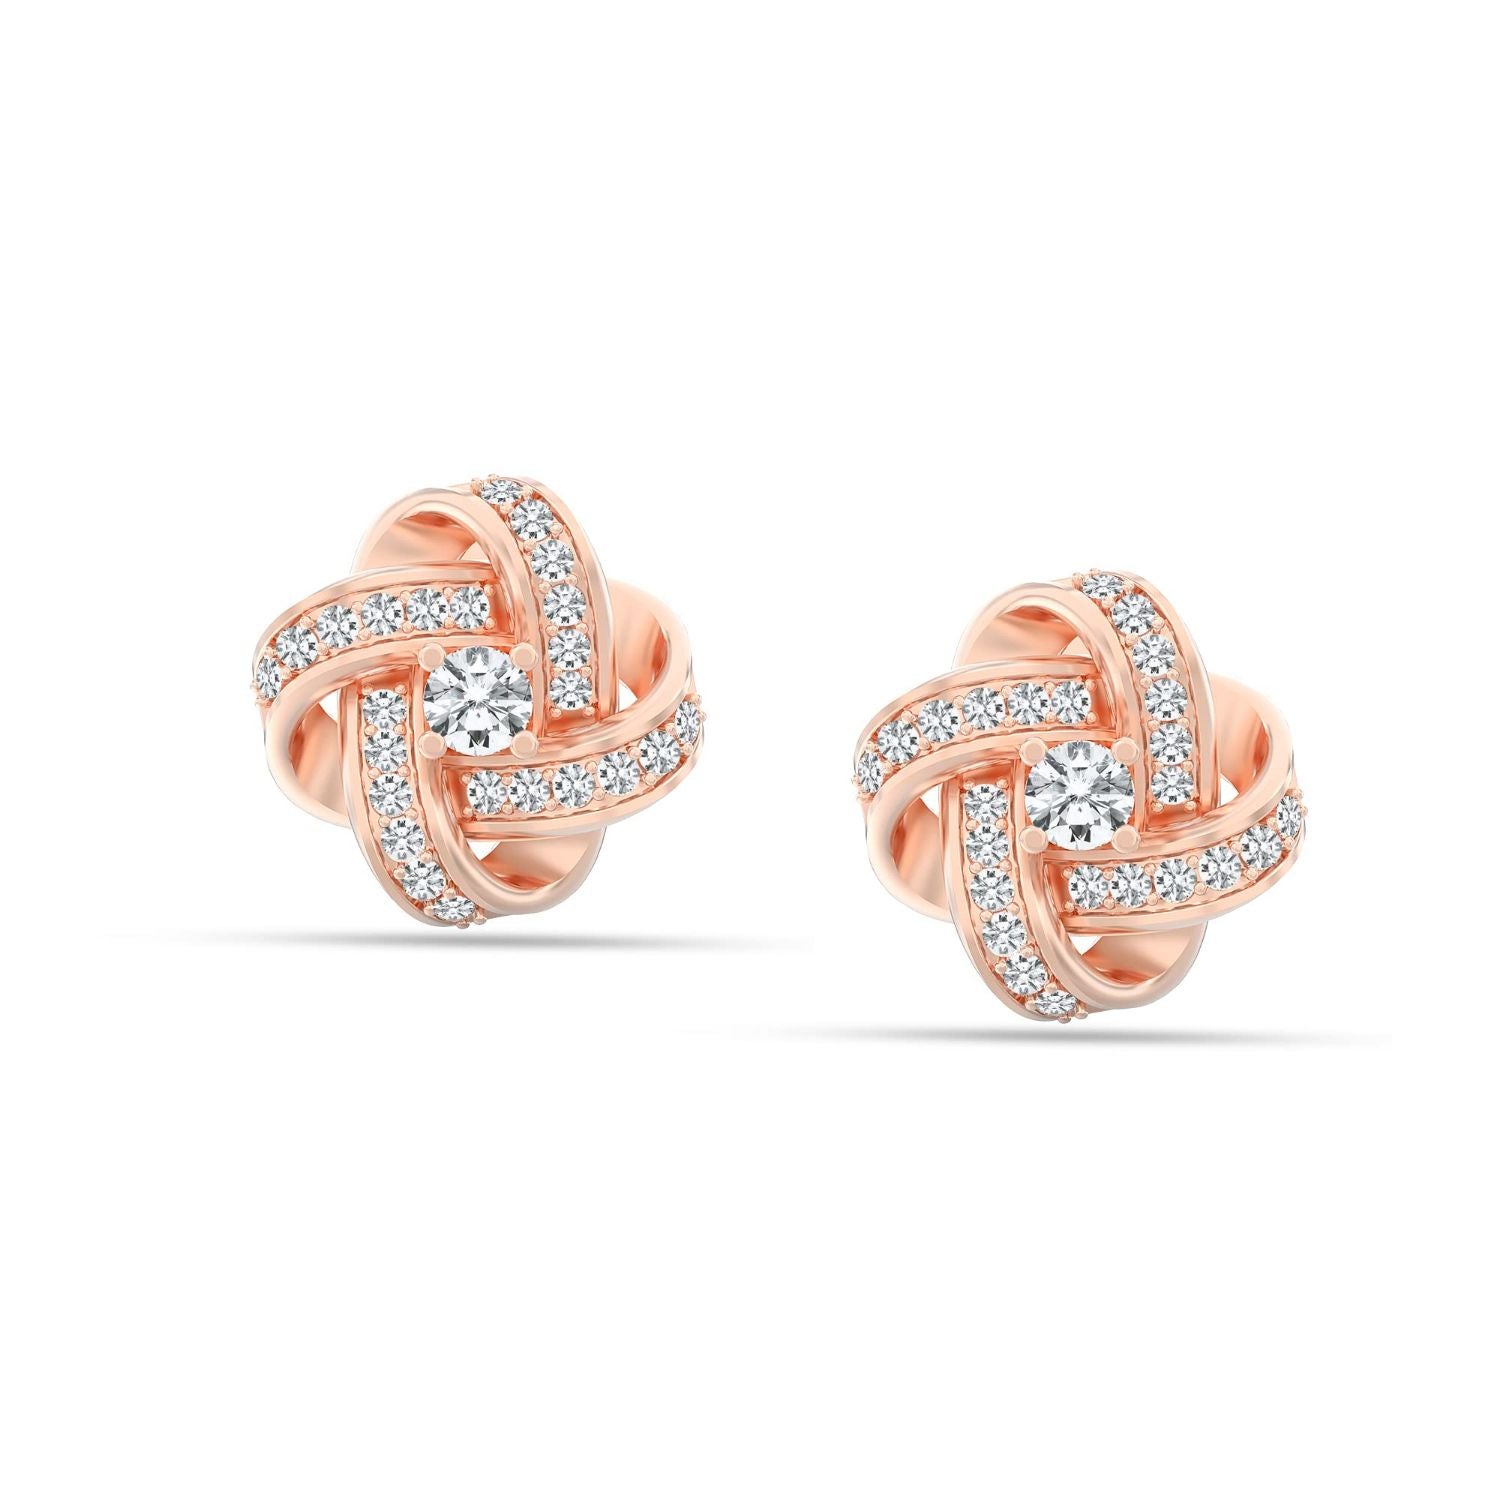 925 Sterling Silver Rose Gold-Plated Cubic Zirconia Love Knot Micro Pave Stud Earrings for Women Teen